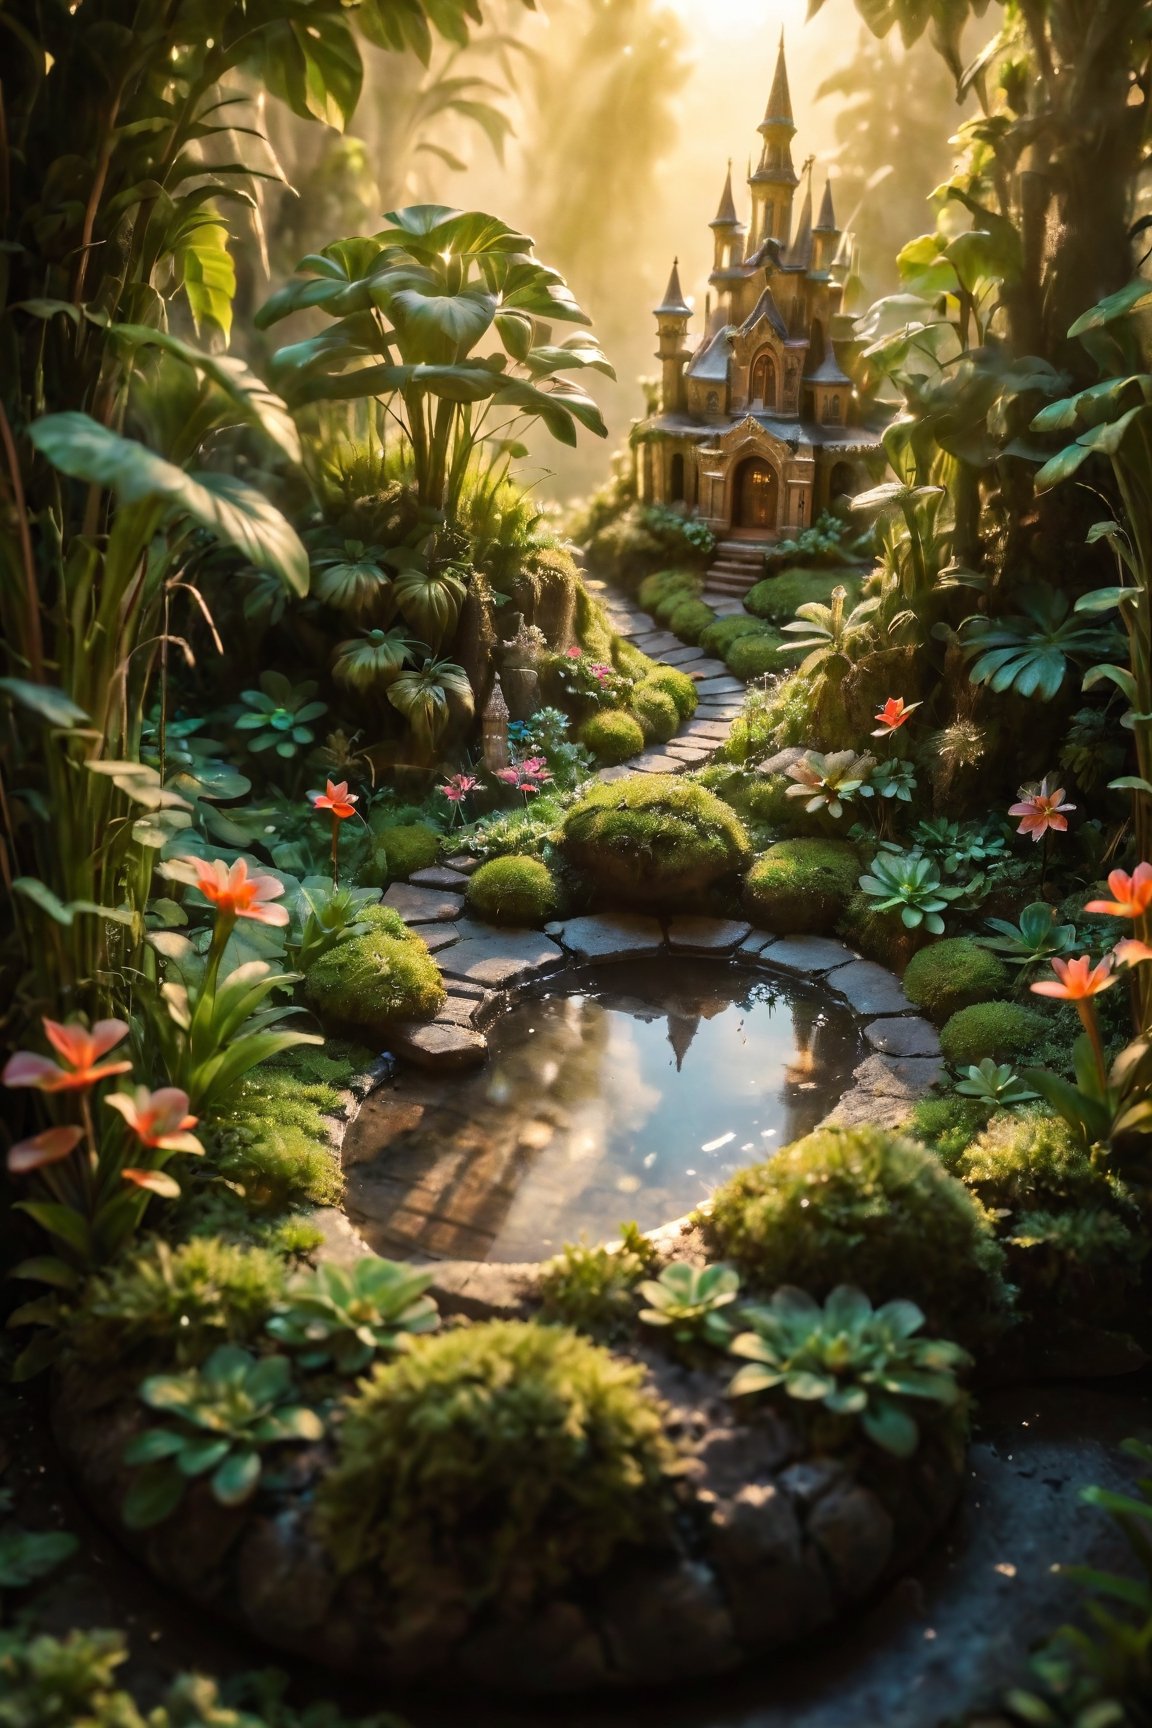 sitting in a cloud, masterpiece, golden hour, tilt shift, shot with Leica m12, chromatic abberations, light leaks, HDR, 2.5D, hyper realistic, hard lighting, bloom effect, ray tracing, A whimsical and enchanting scene of a miniature garden, but with a unique twist. The garden is nestled within the palm of a giant's hand, creating an illusion of a "maxiature" - a miniature version of something massive. The giant's hand is meticulously sculpted and painted to resemble a lush, verdant landscape, complete with rolling hills, towering trees, and winding rivers. Tiny flowers, leaves, and insects adorn every inch of the miniature garden, adding a delicate touch to the overall composition. In the distance, a serene castle sits atop a hill, its turrets and spires reflecting in the still waters of a lake below. Even the clouds in the sky are miniaturized, casting soft shadows over the landscape. The contrast between the massive, weathered hand and the intricate, meticulous details of the miniature garden creates a sense of wonder and scale, inviting viewers to step into this magical world where the boundaries between big and small are blurred.32K,ray-tracing, (Realism), (Masterpiece), (Exquisite Detail), Subtle and Beautiful Detail,(Facial Detail), (Highest Quality), (Super-Resolution),(Highly Detailed Illustration),Best Quality,Depth of Field,Natural Shadows photorealistic, Detailedface,madgod,stop motion,Flying,Flight,Floating,dashataran,action shot